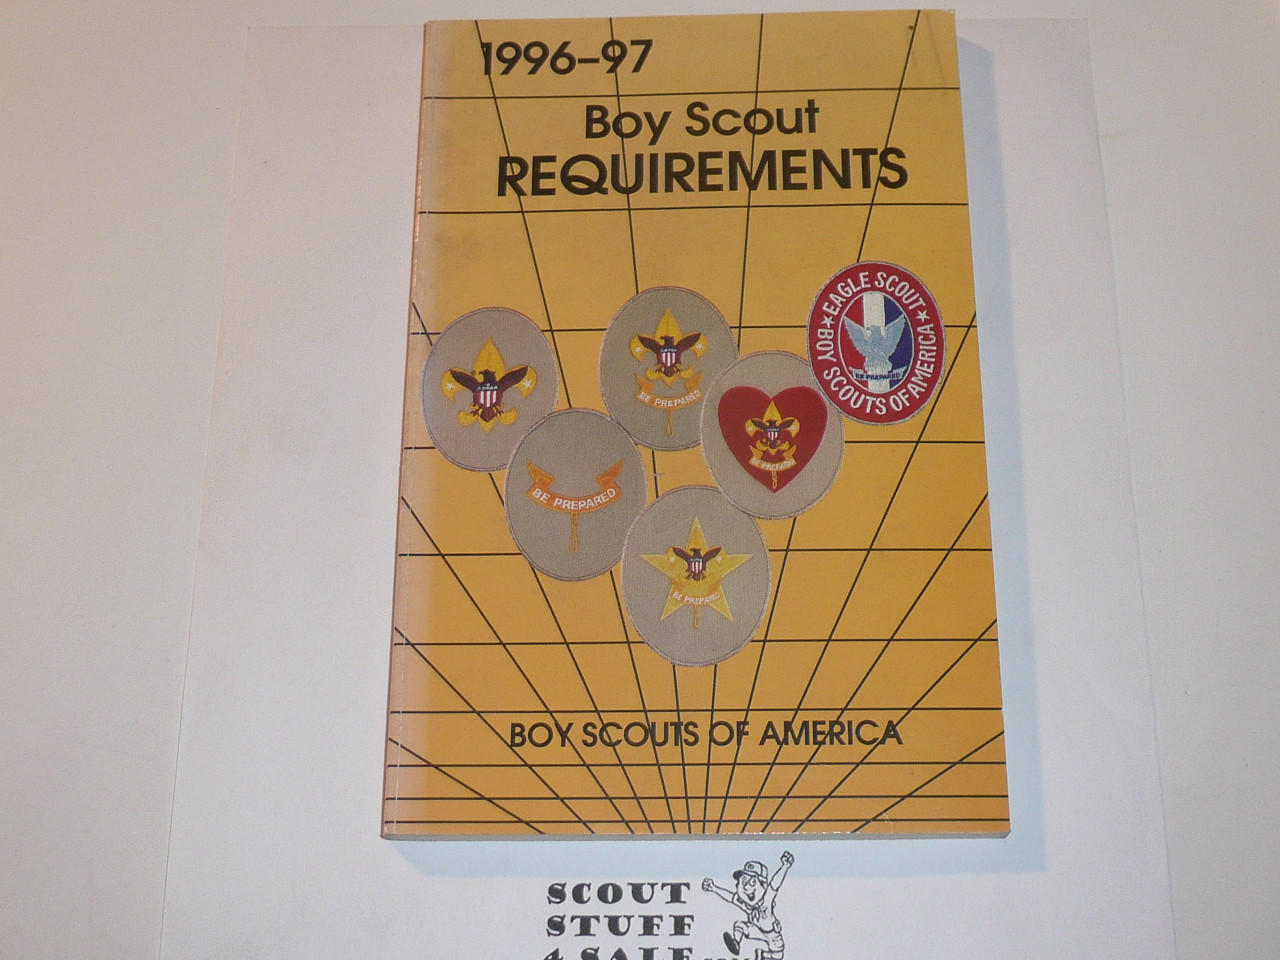 1996-1997 Boy Scout Requirements Book, 9-96 Printing